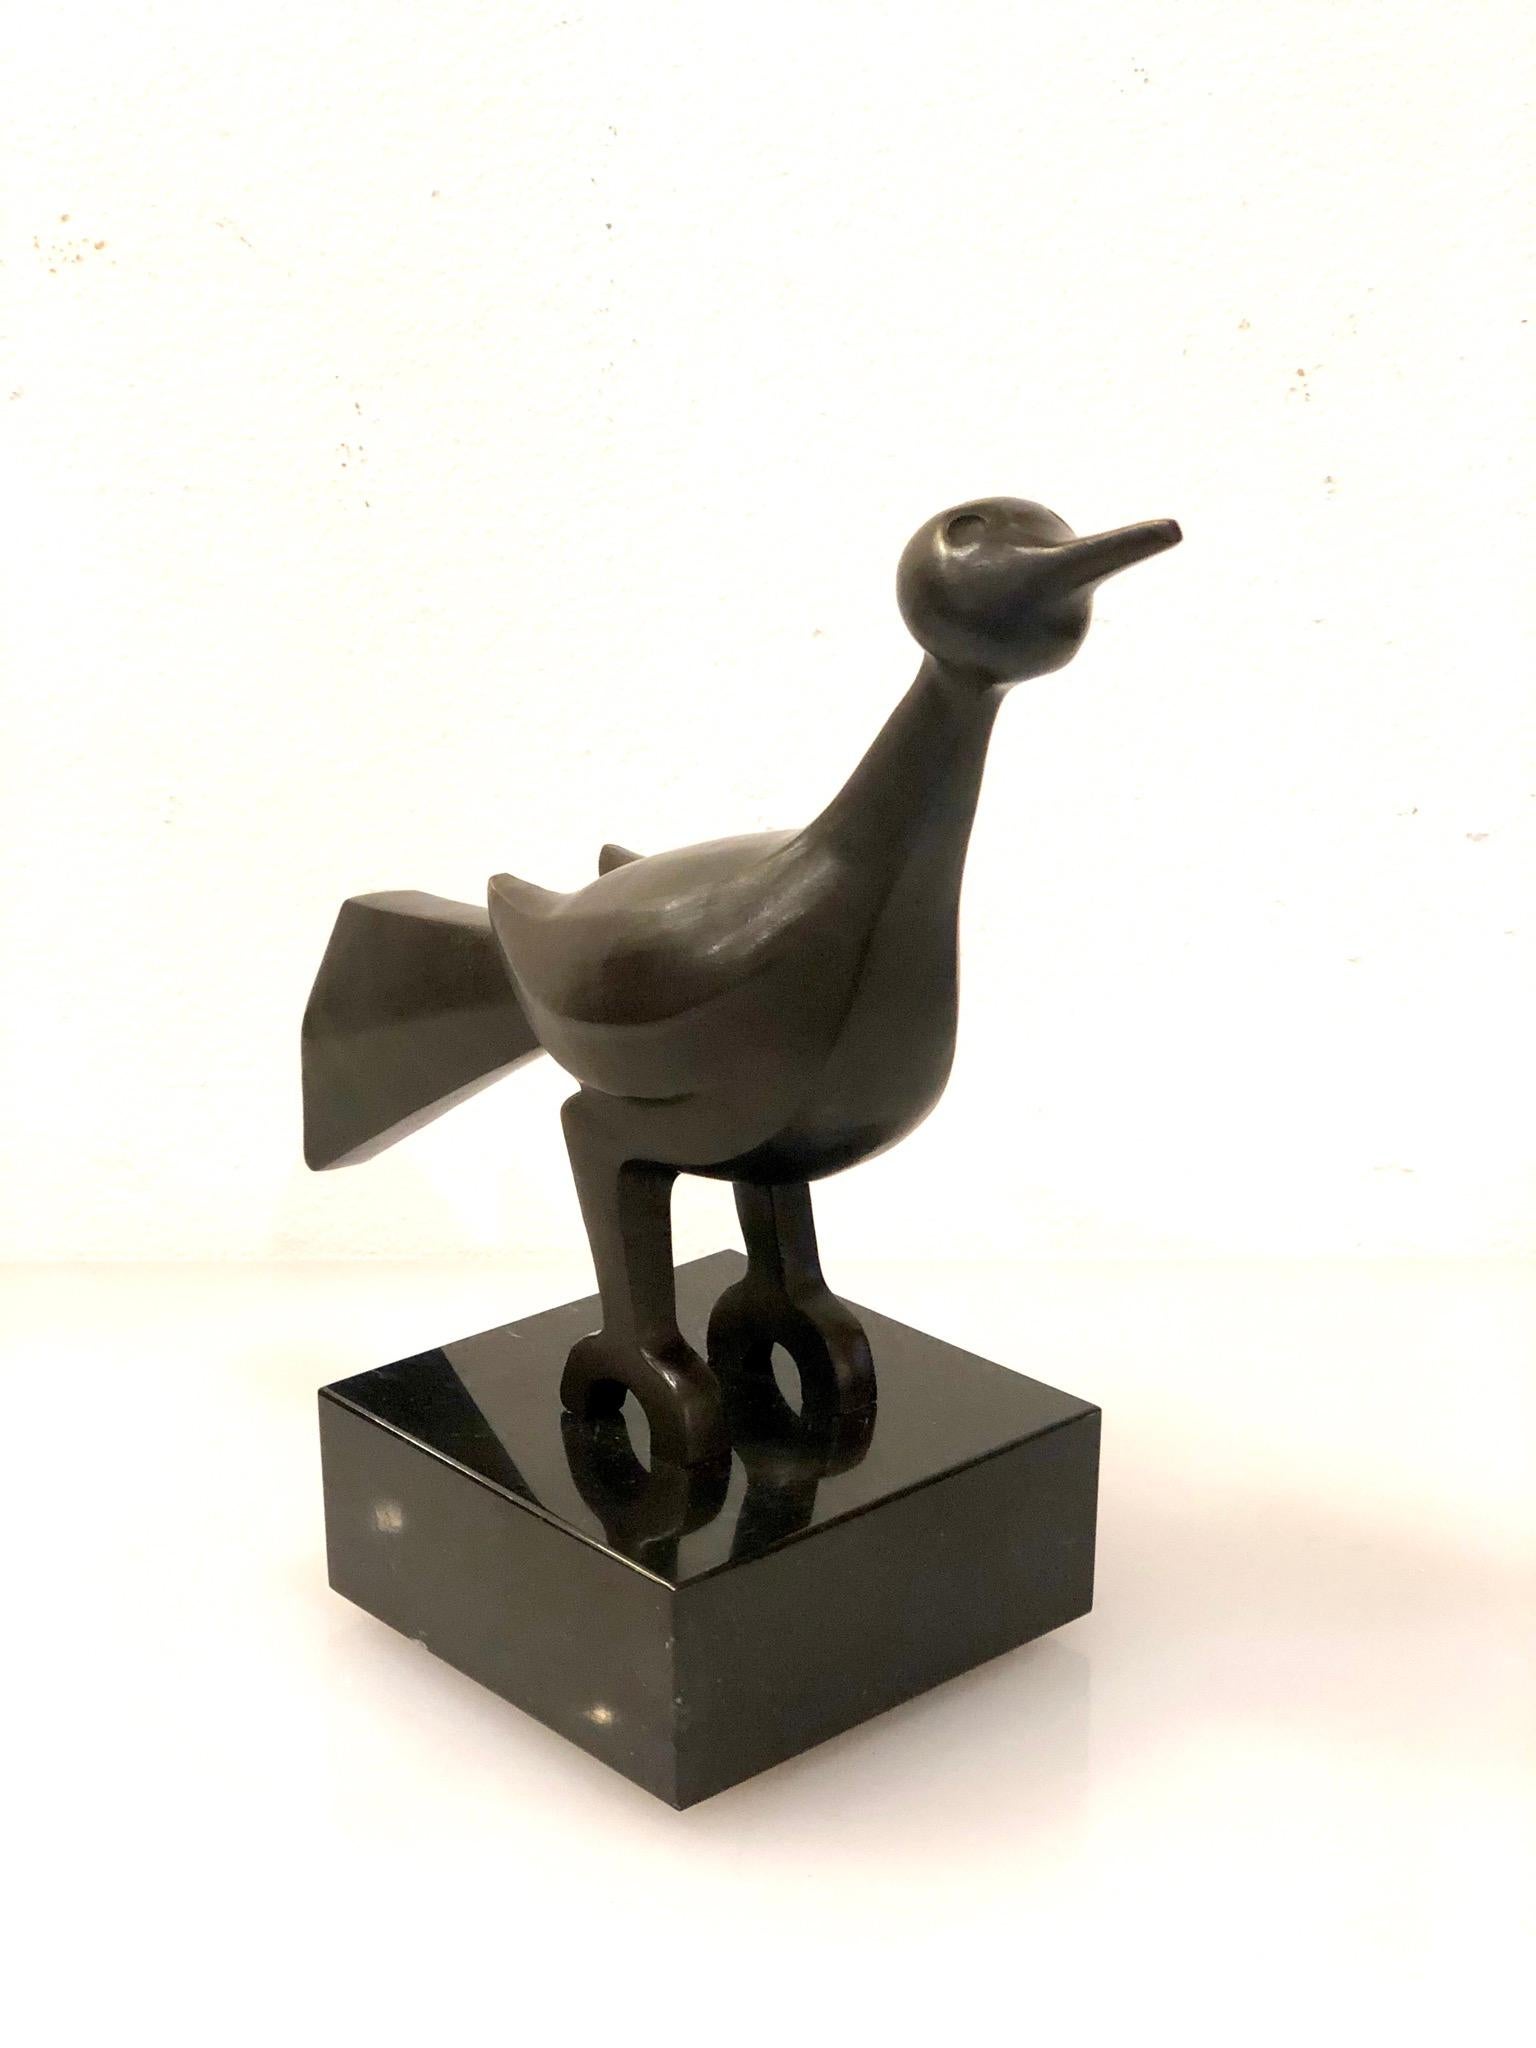 Beautiful original bronze sculpture by Mexican artist Lorenzo Martinez, contemporary artist from Oaxaca, many exhibitions in Mexico city and France, this piece its called Algeria/ happiness, 2/20 signed and numbered. Bronze on marble base.